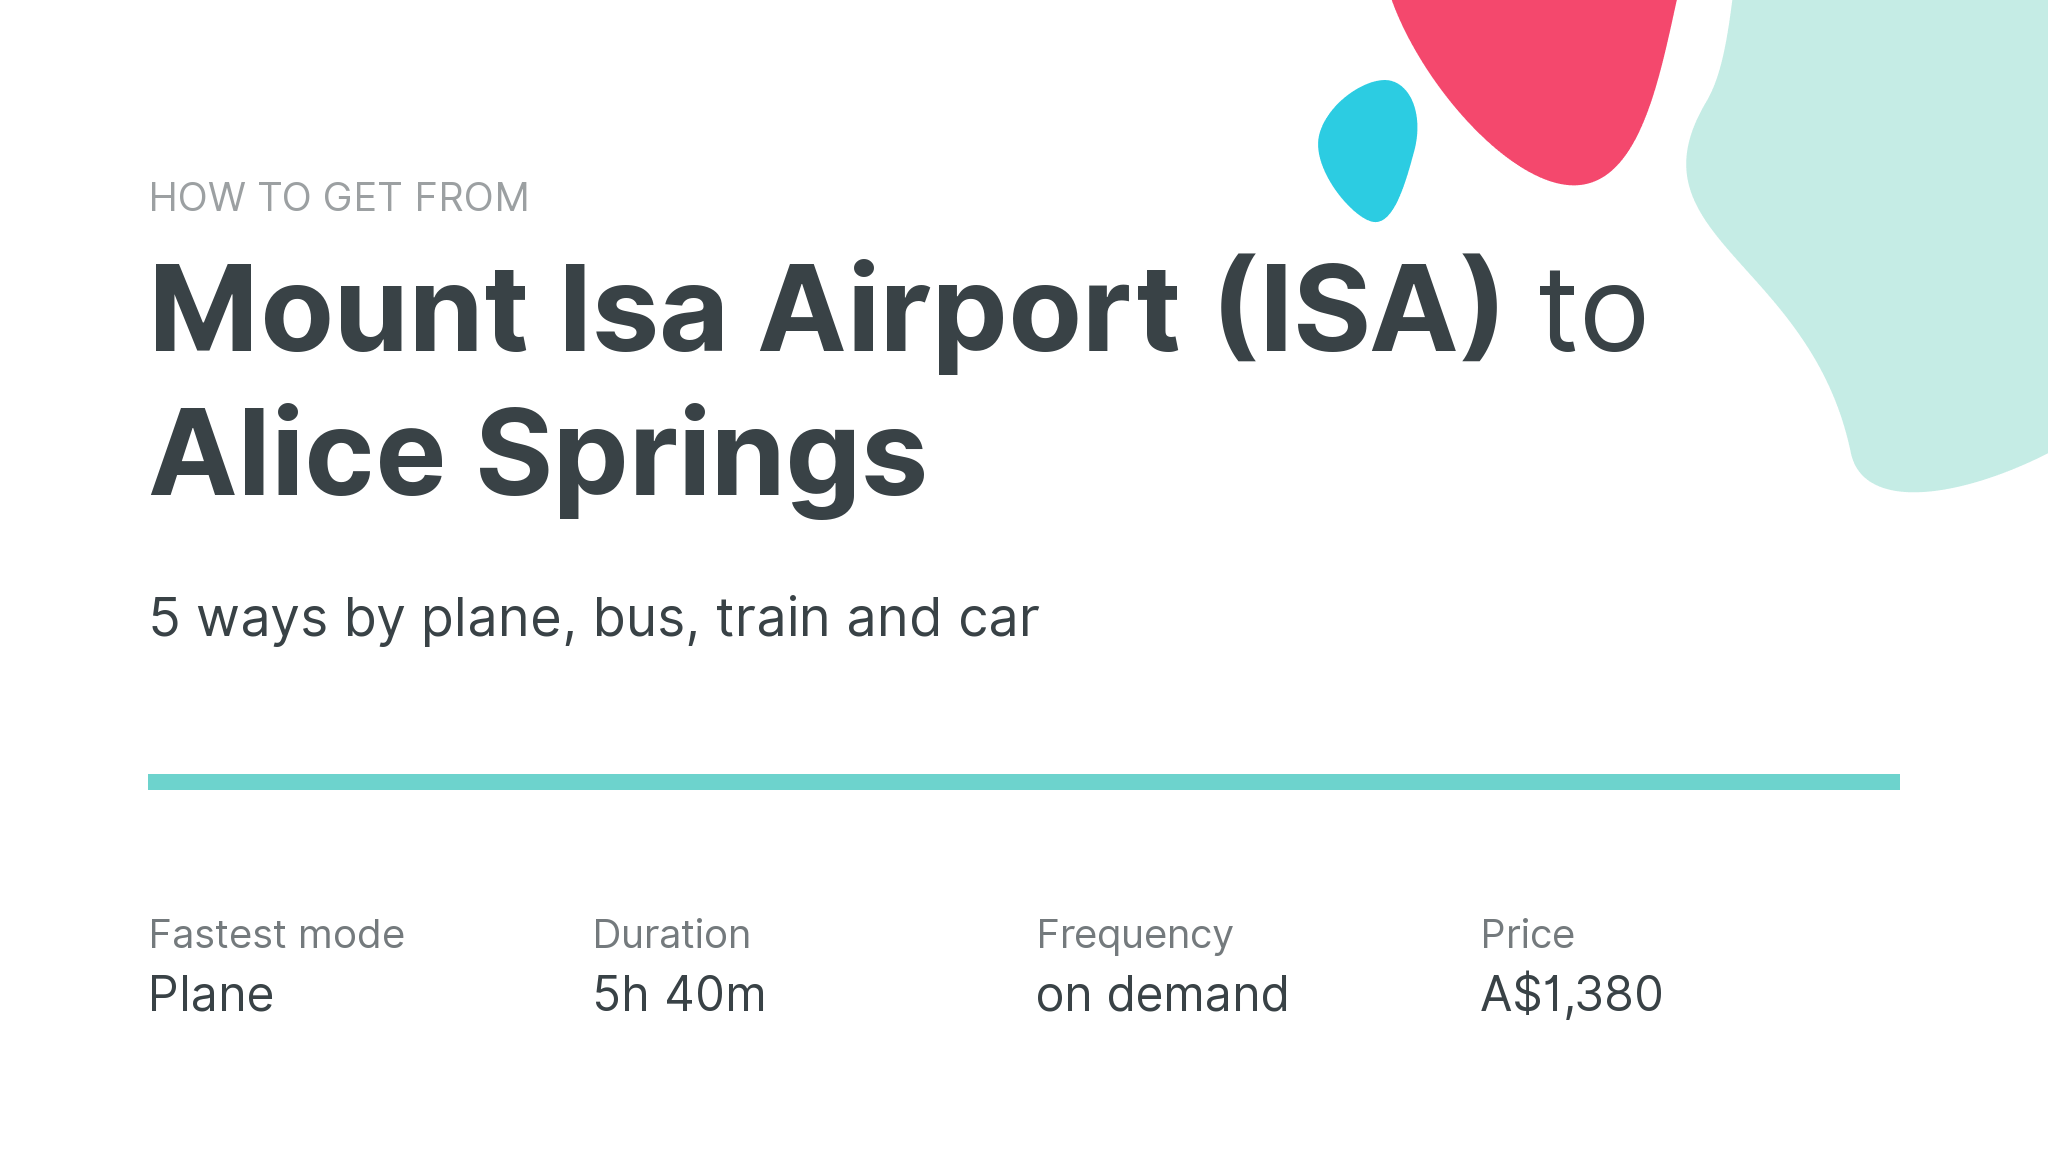 How do I get from Mount Isa Airport (ISA) to Alice Springs